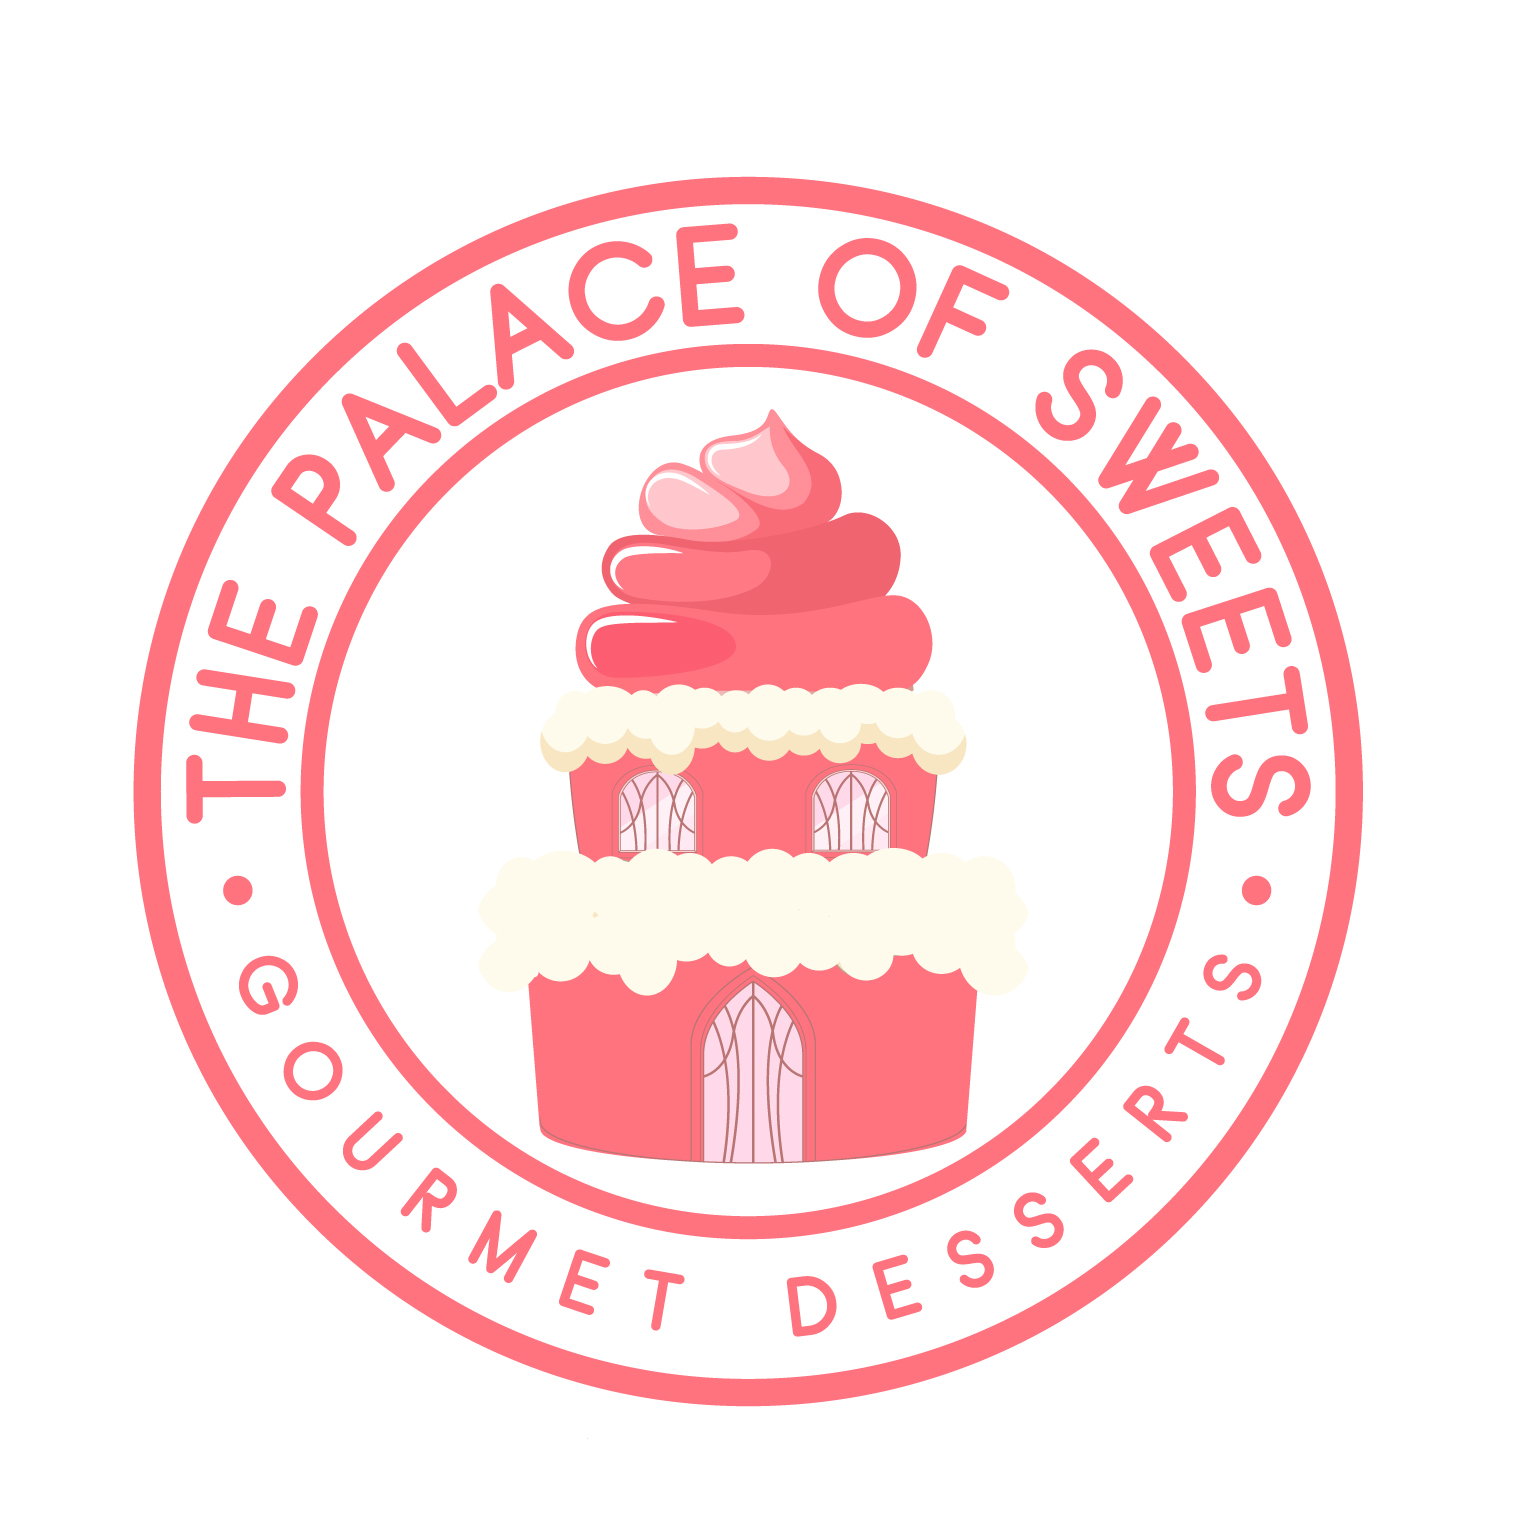 The Palace of Sweets